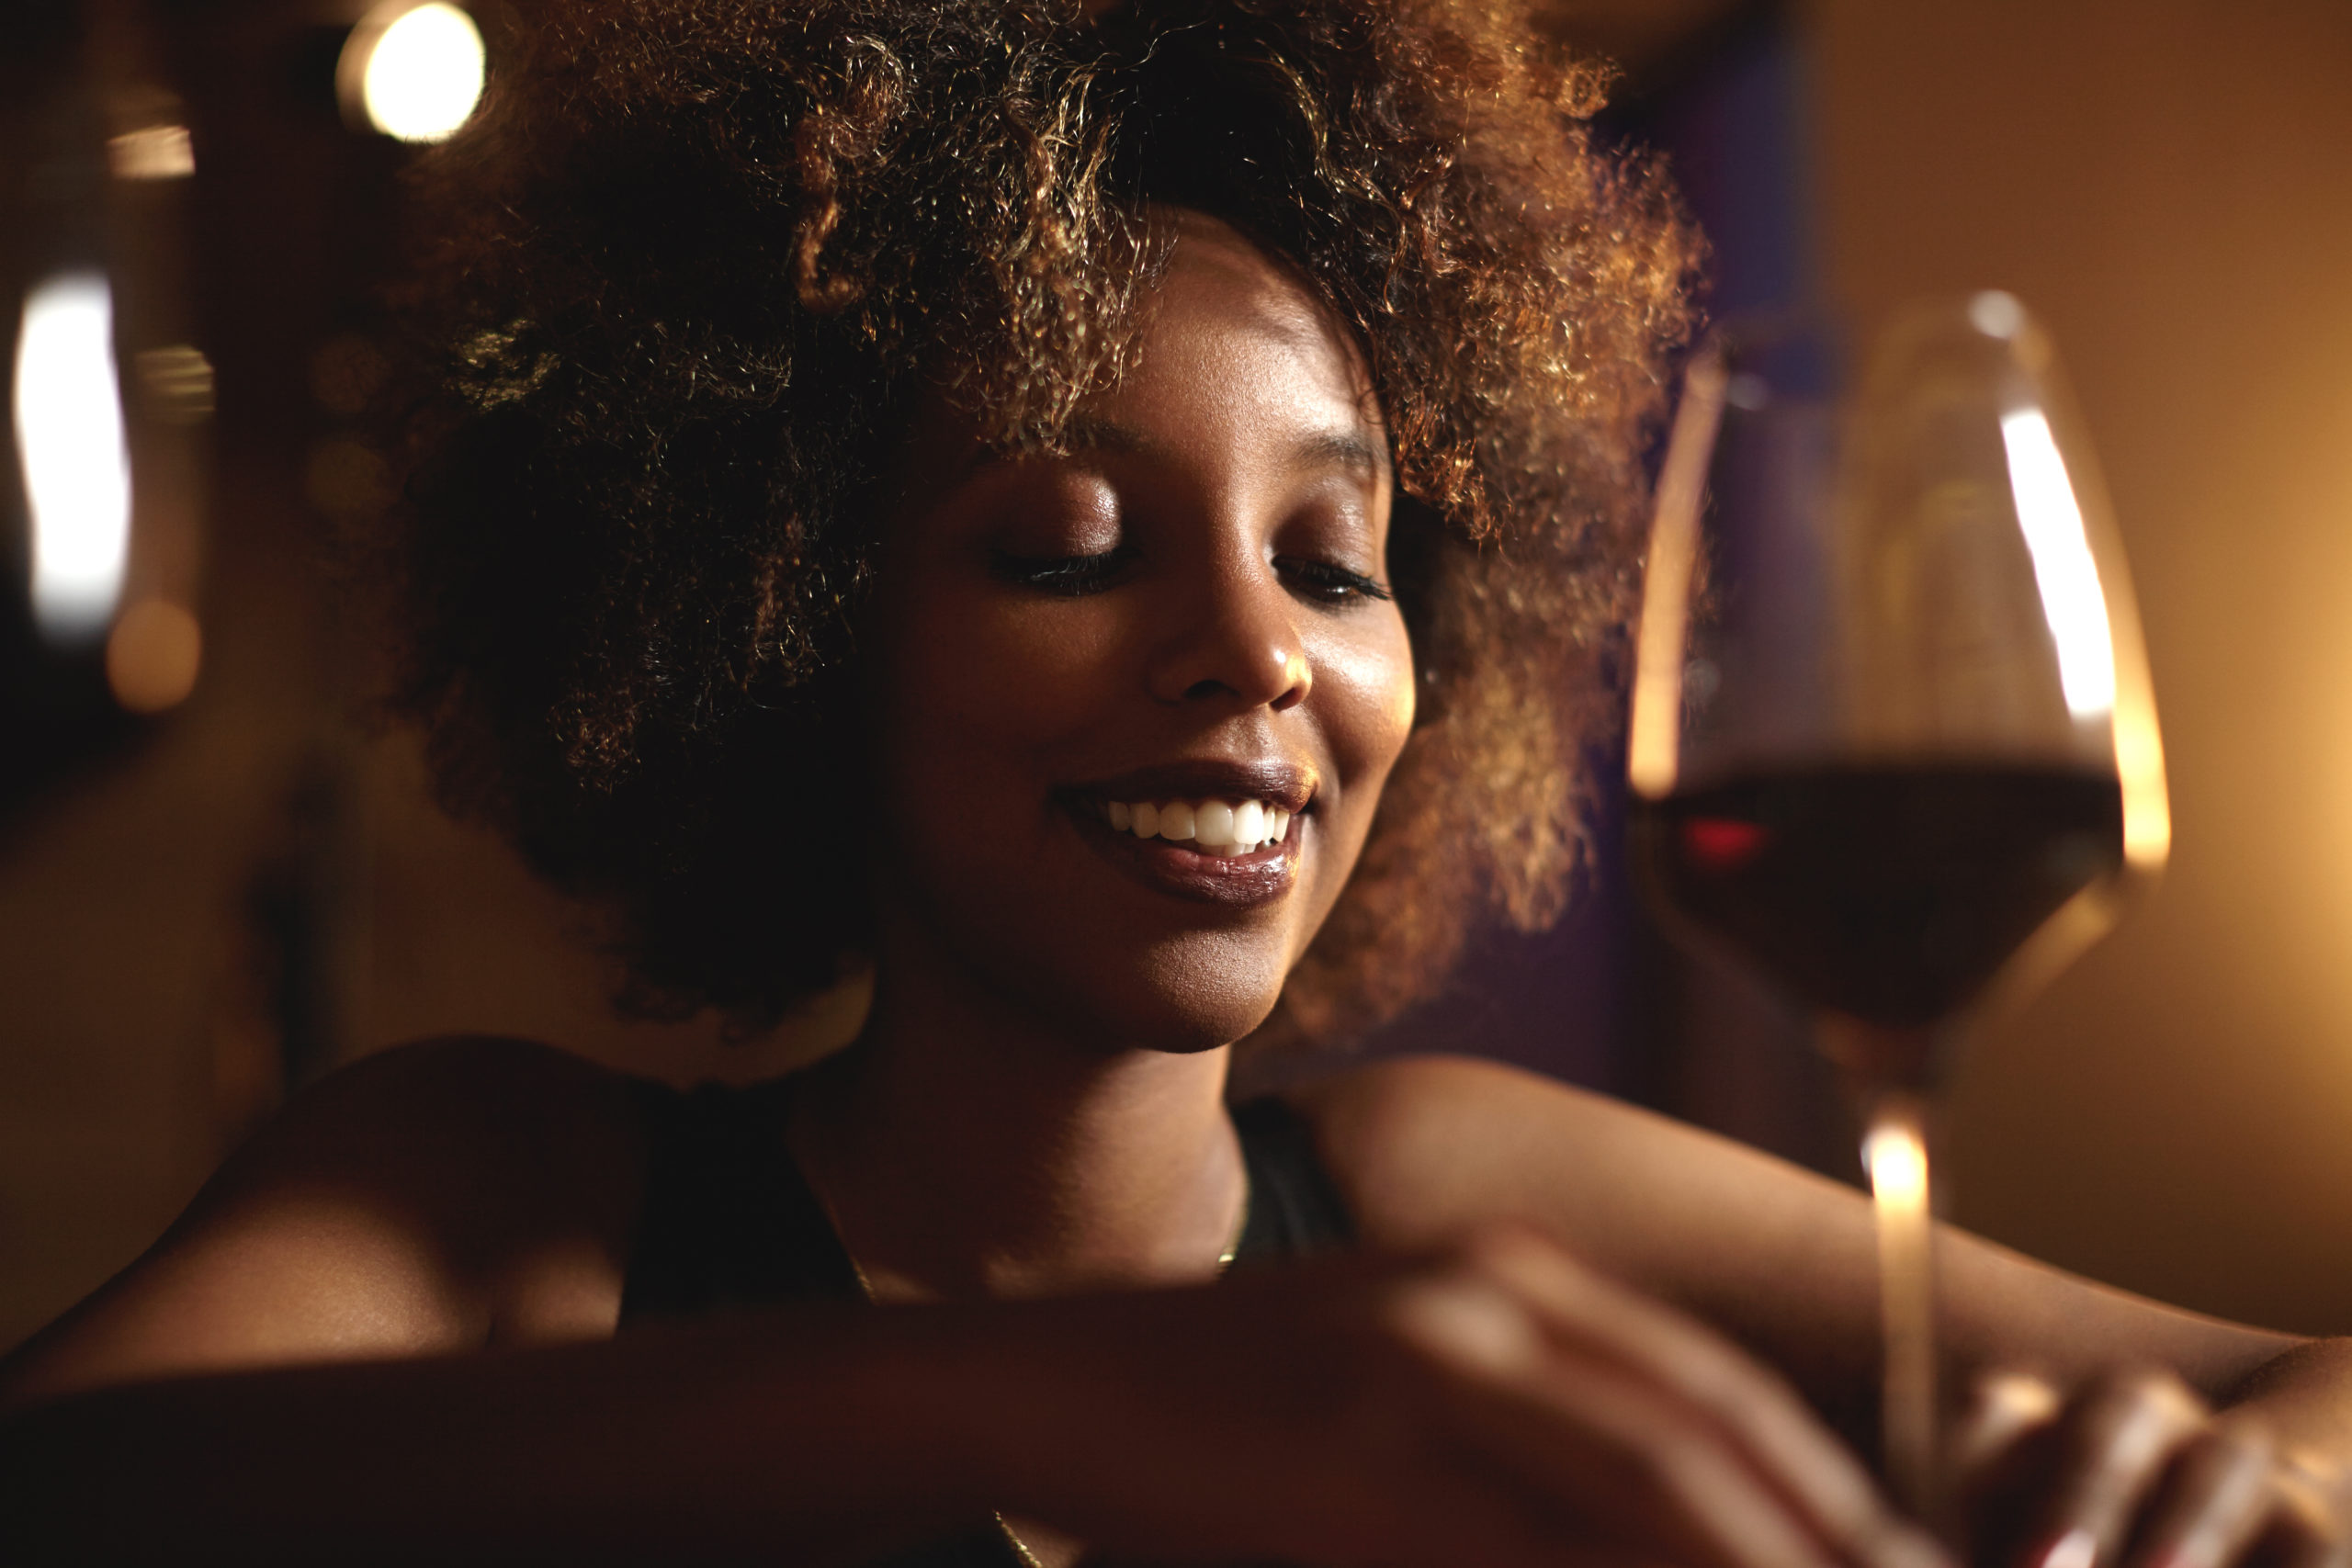 Headshot of good-looking young dark-skinned woman with Afro haircut, proposing toast to her friend on birthday party, looking down with shy smile, trying to find right words, holding glass of red wine